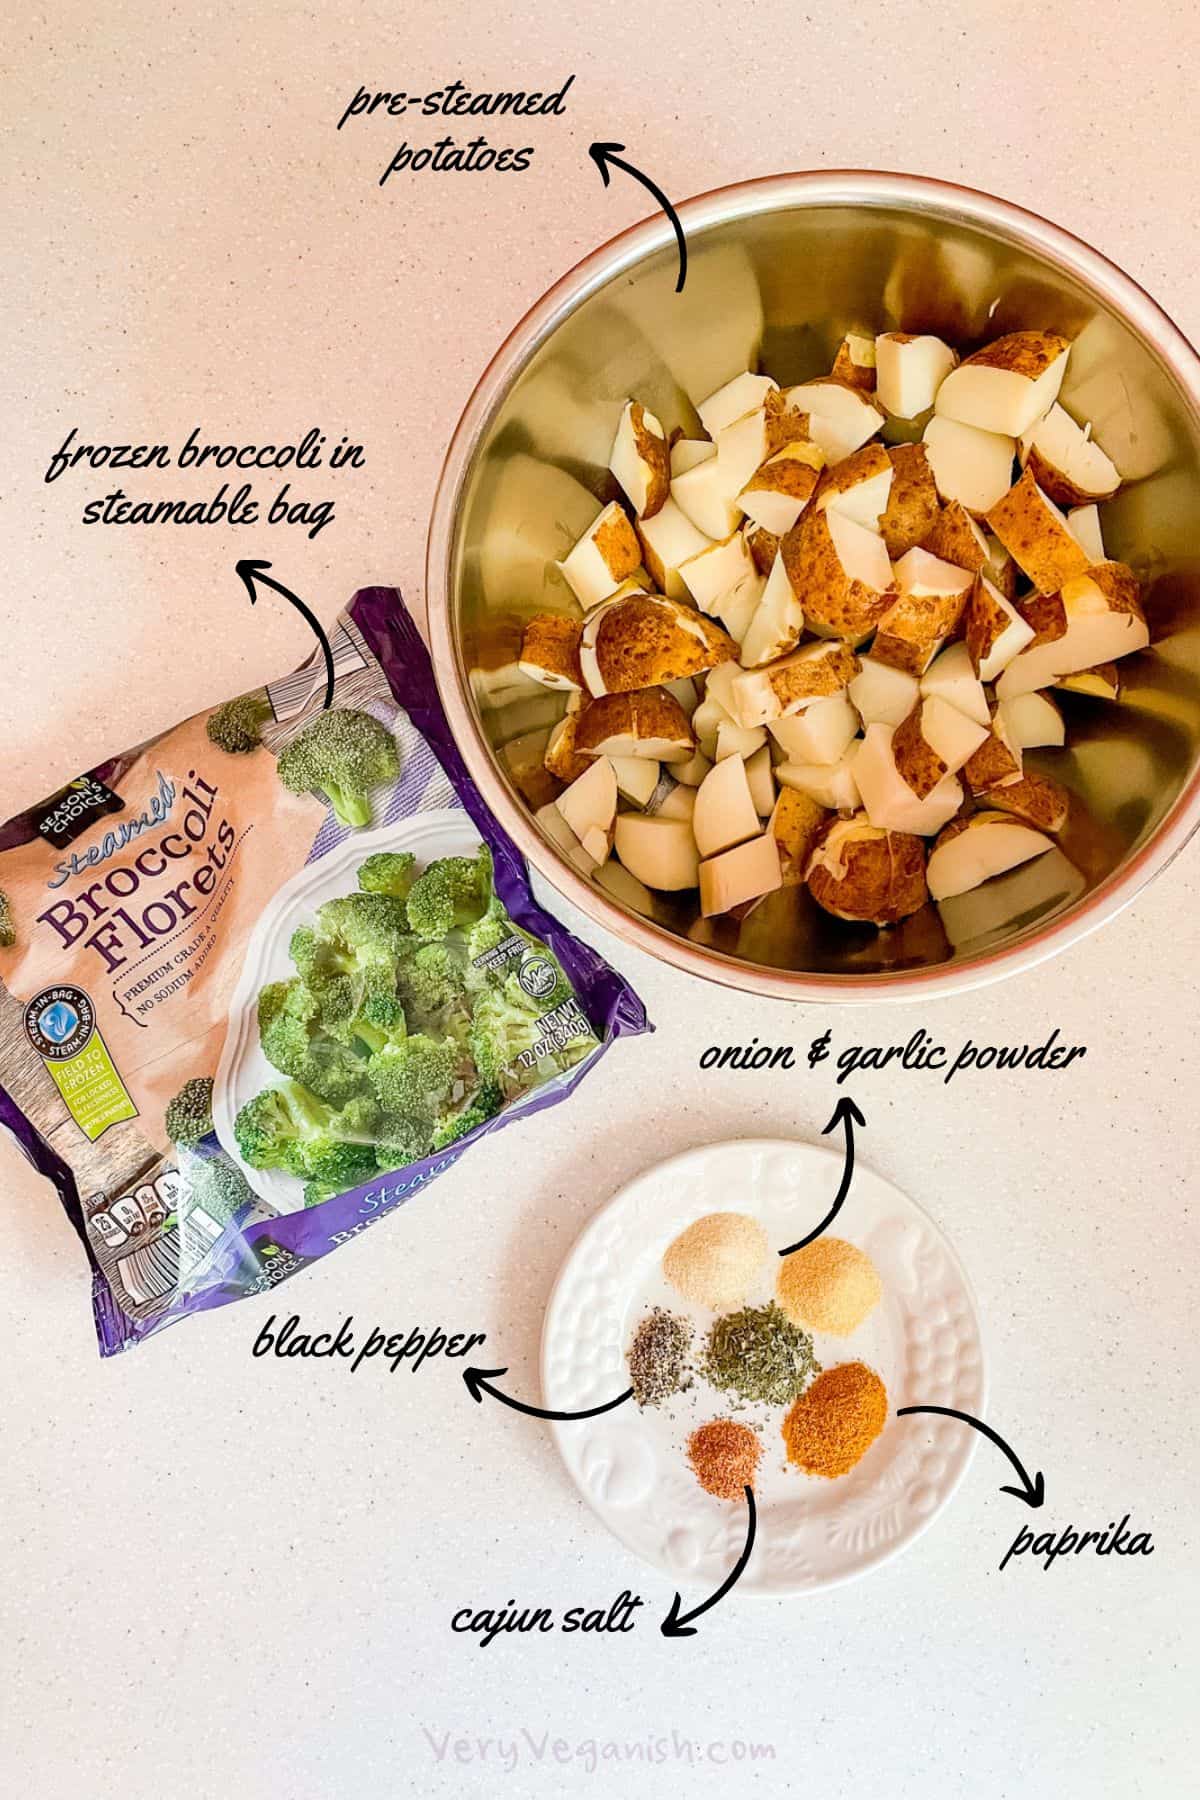 Ingredients for oil-free roasted potatoes and broccoli: frozen broccoli in steamable bag, cut pre-steamed russet potatoes, onion powder, garlic powder, paprika, cajun salt, black pepper